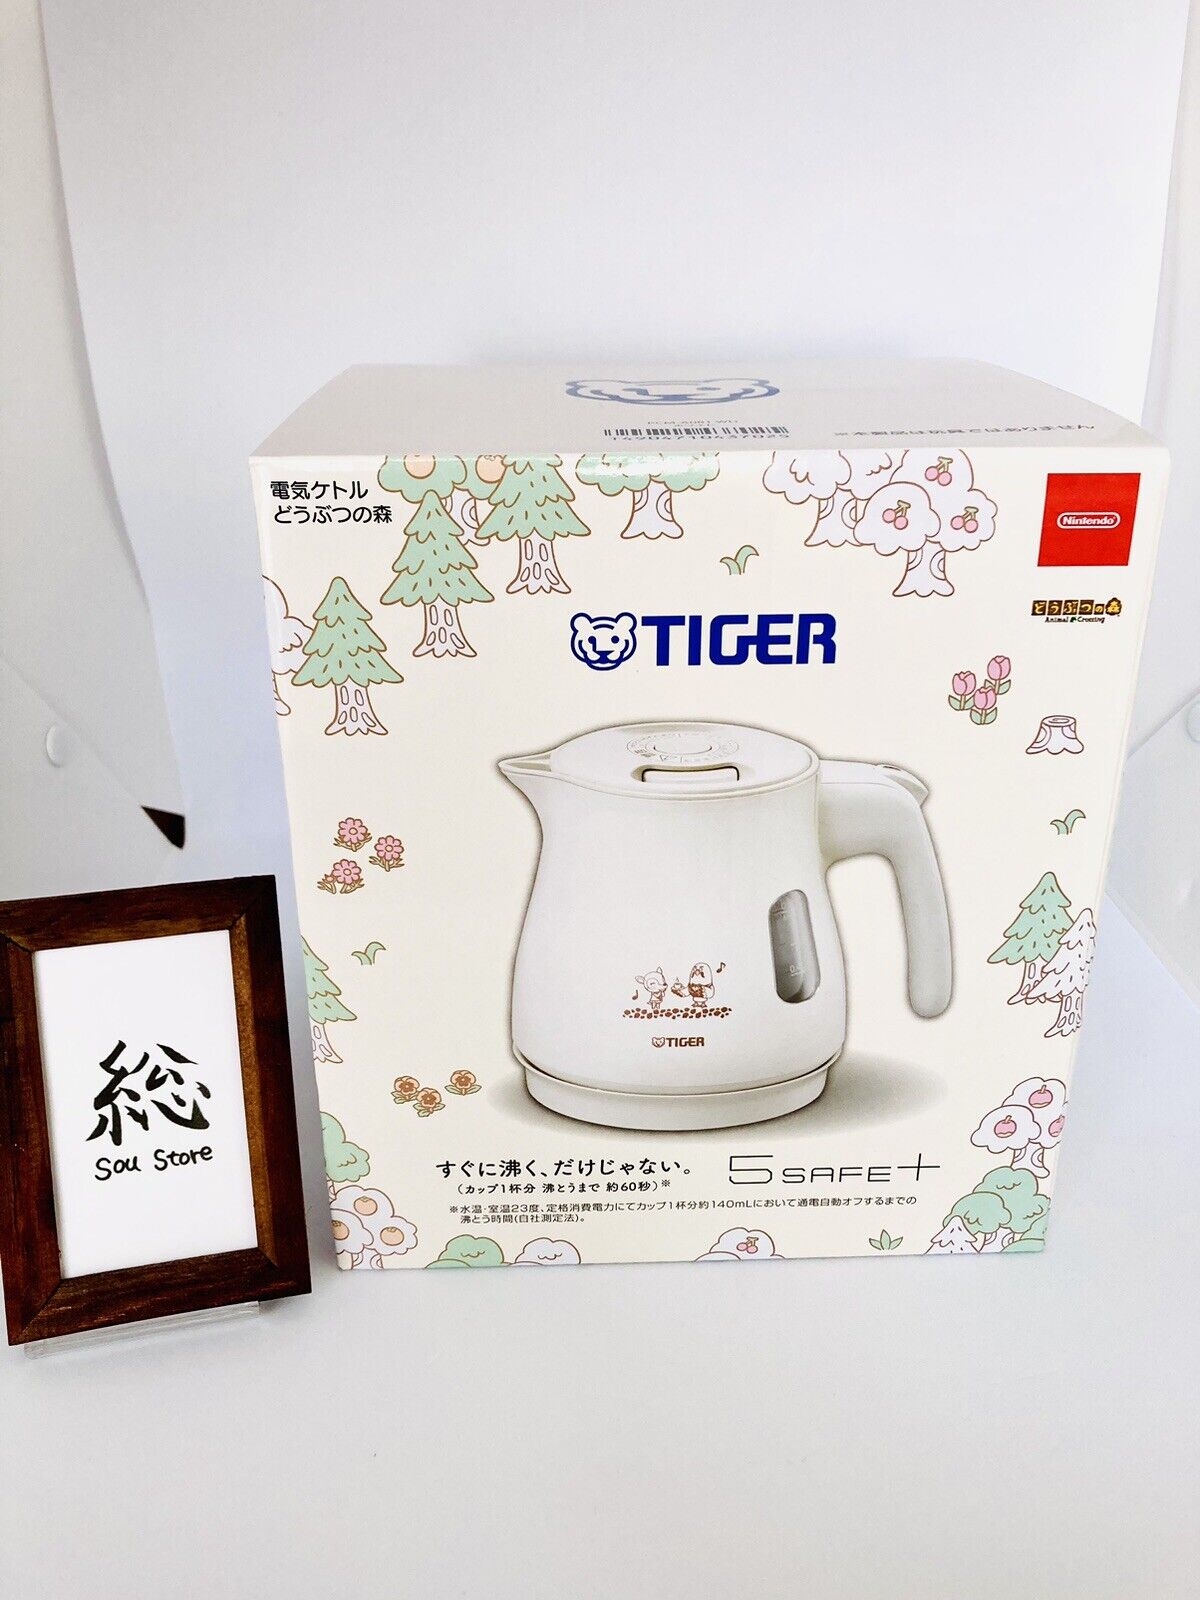 Animal Crossing TIGER Electric Kettle Nintendo Store Limited